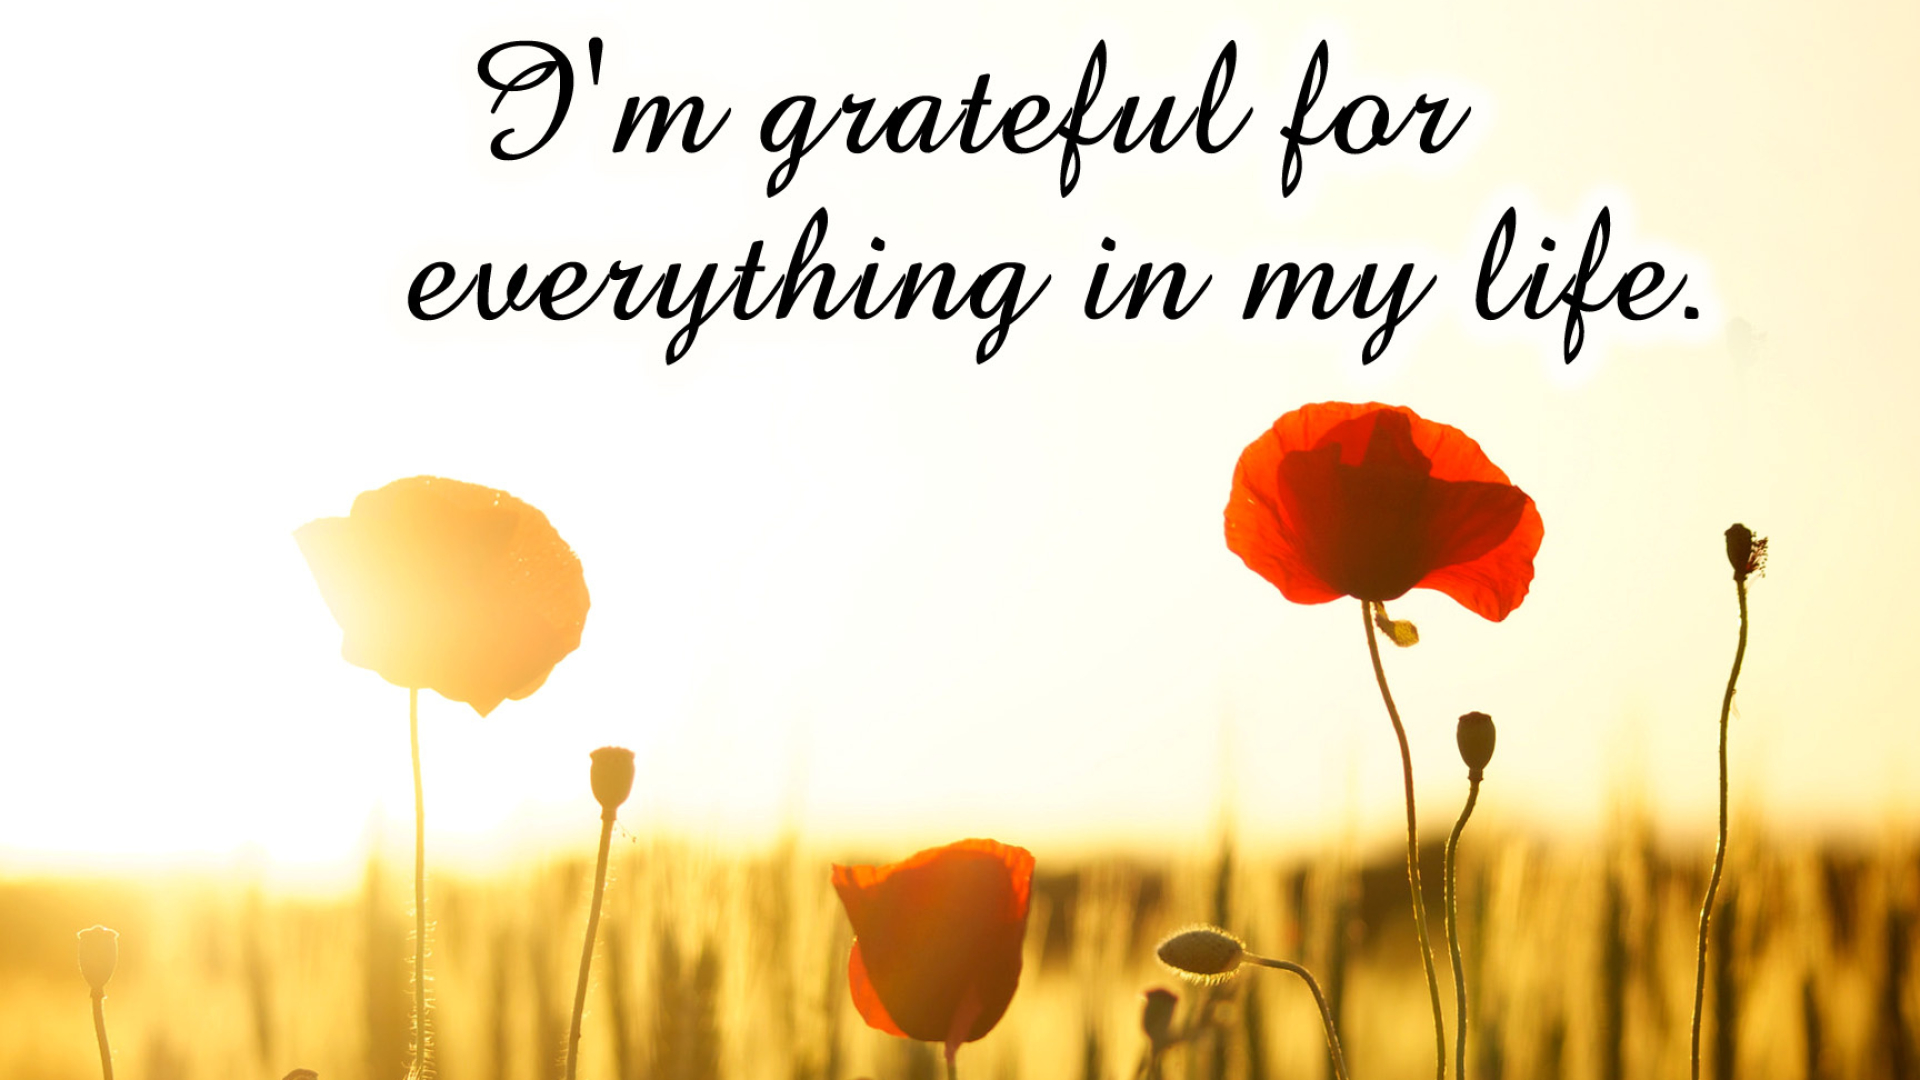 Gratitude: Affirmation, Personal excellence, Life motto, Appreciation for life, Bokeh. 1920x1080 Full HD Wallpaper.